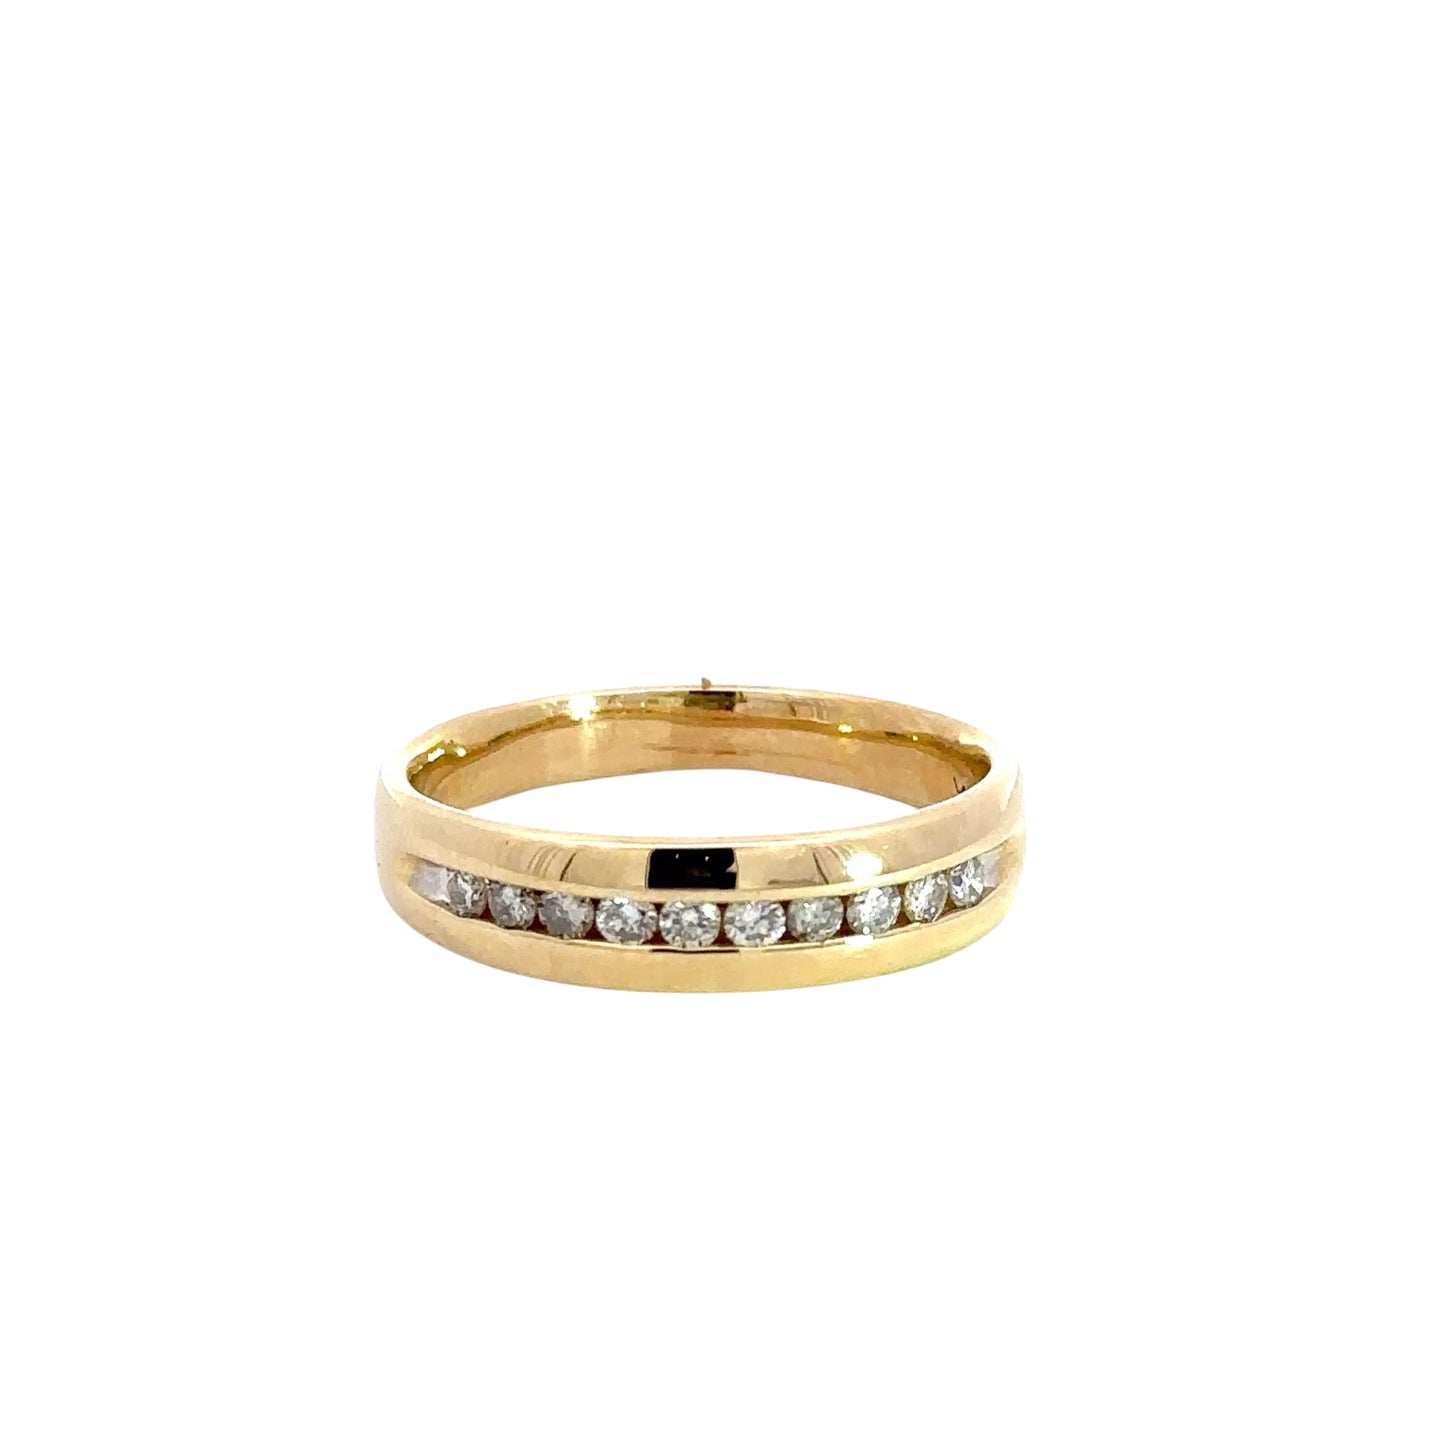 Front of yellow gold diamond band ring with 10 round diamonds on half the band